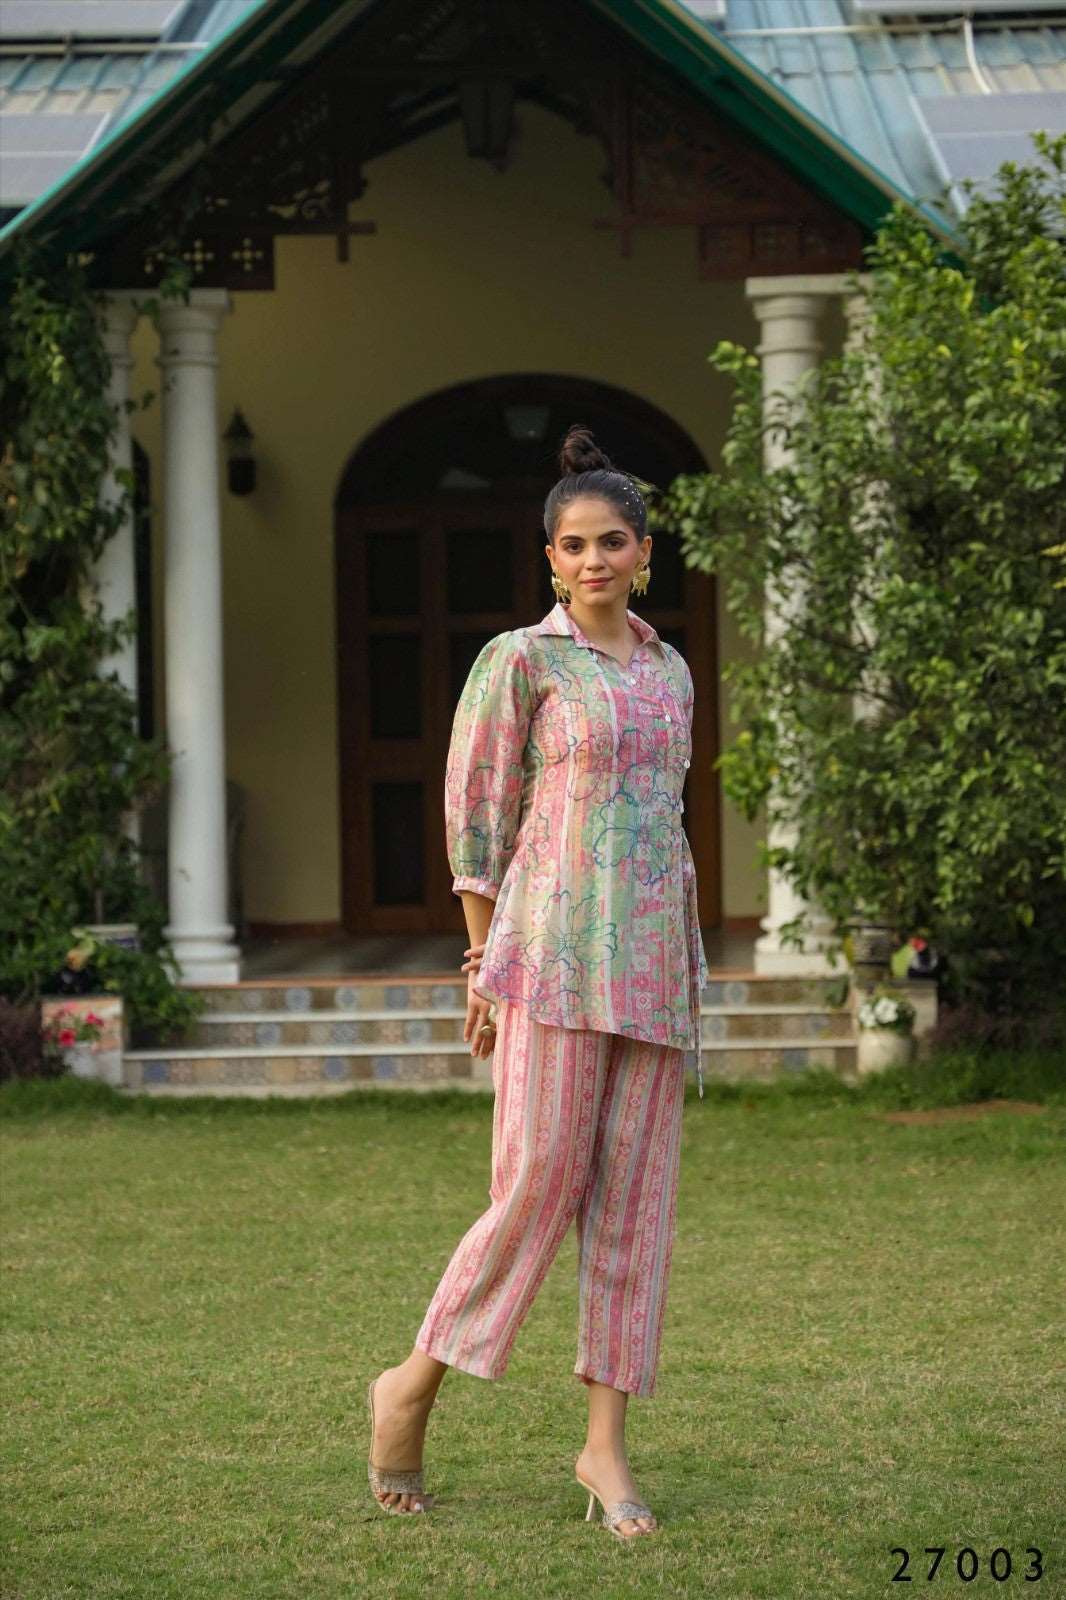 The model in the image is wearing Pink Floral Loungewear Co ord Set Women from Alice Milan. Crafted with the finest materials and impeccable attention to detail, the  looks premium, trendy, luxurious and offers unparalleled comfort. It’s a perfect clothing option for loungewear, resort wear, party wear or for an airport look. The woman in the image looks happy, and confident with her style statement putting a happy smile on her face.